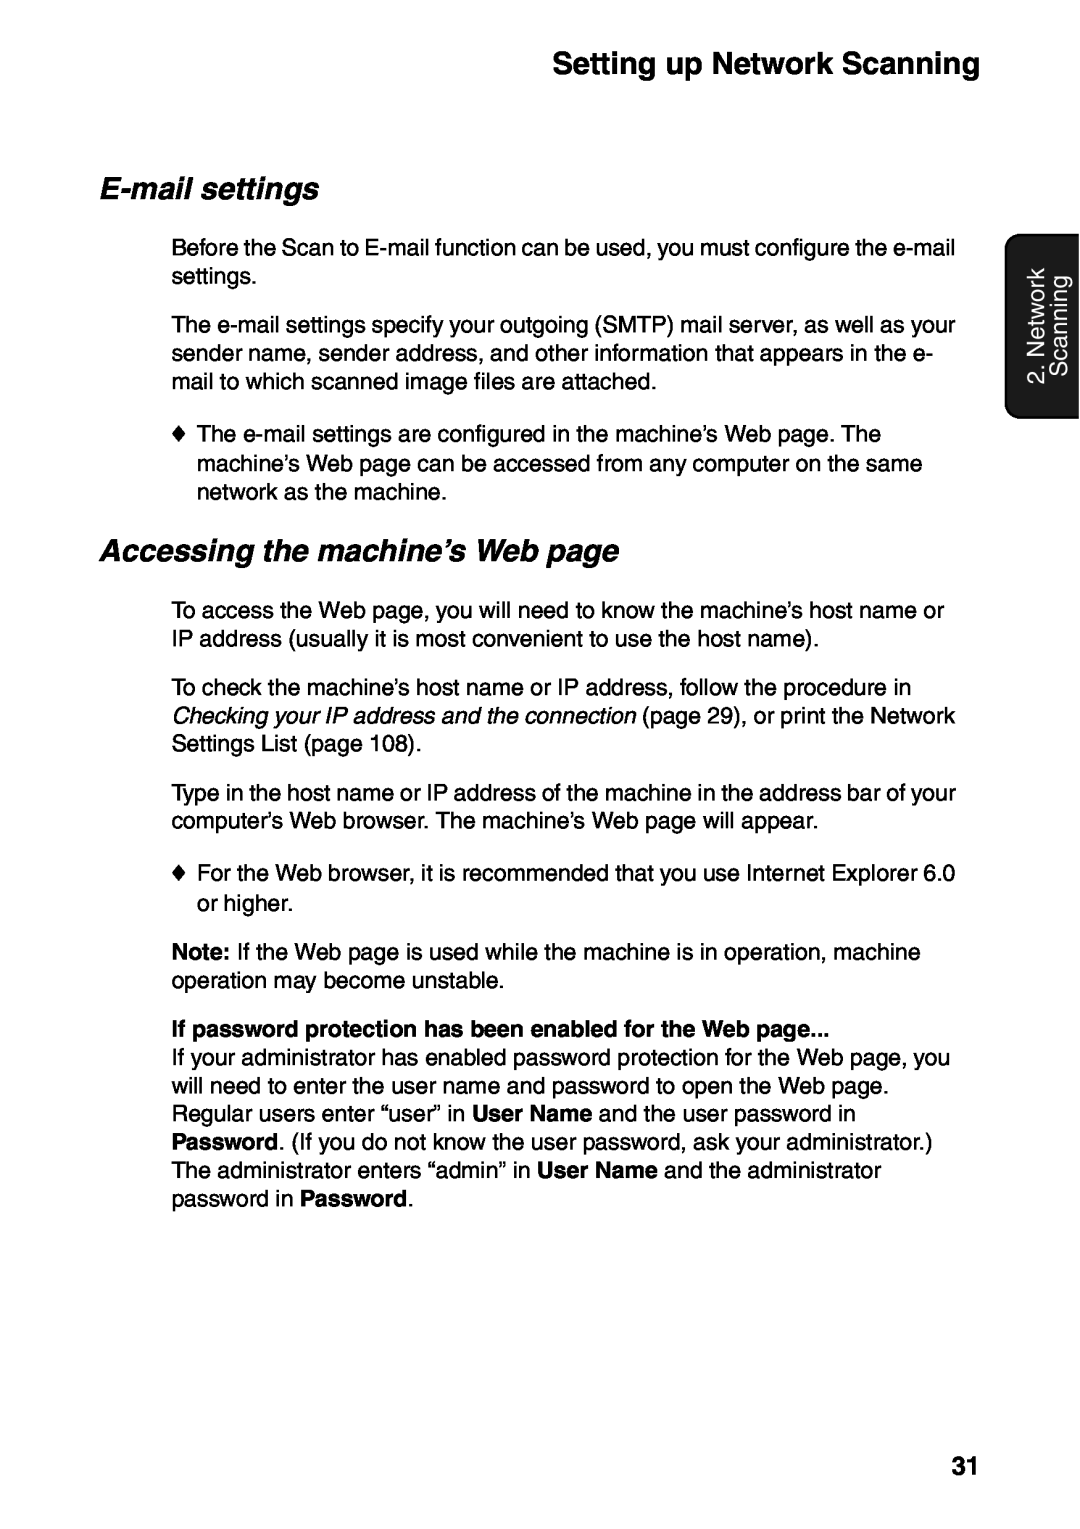 Sharp FO-IS115N operation manual E-mail settings, Accessing the machine’s Web page, Network Scanning 